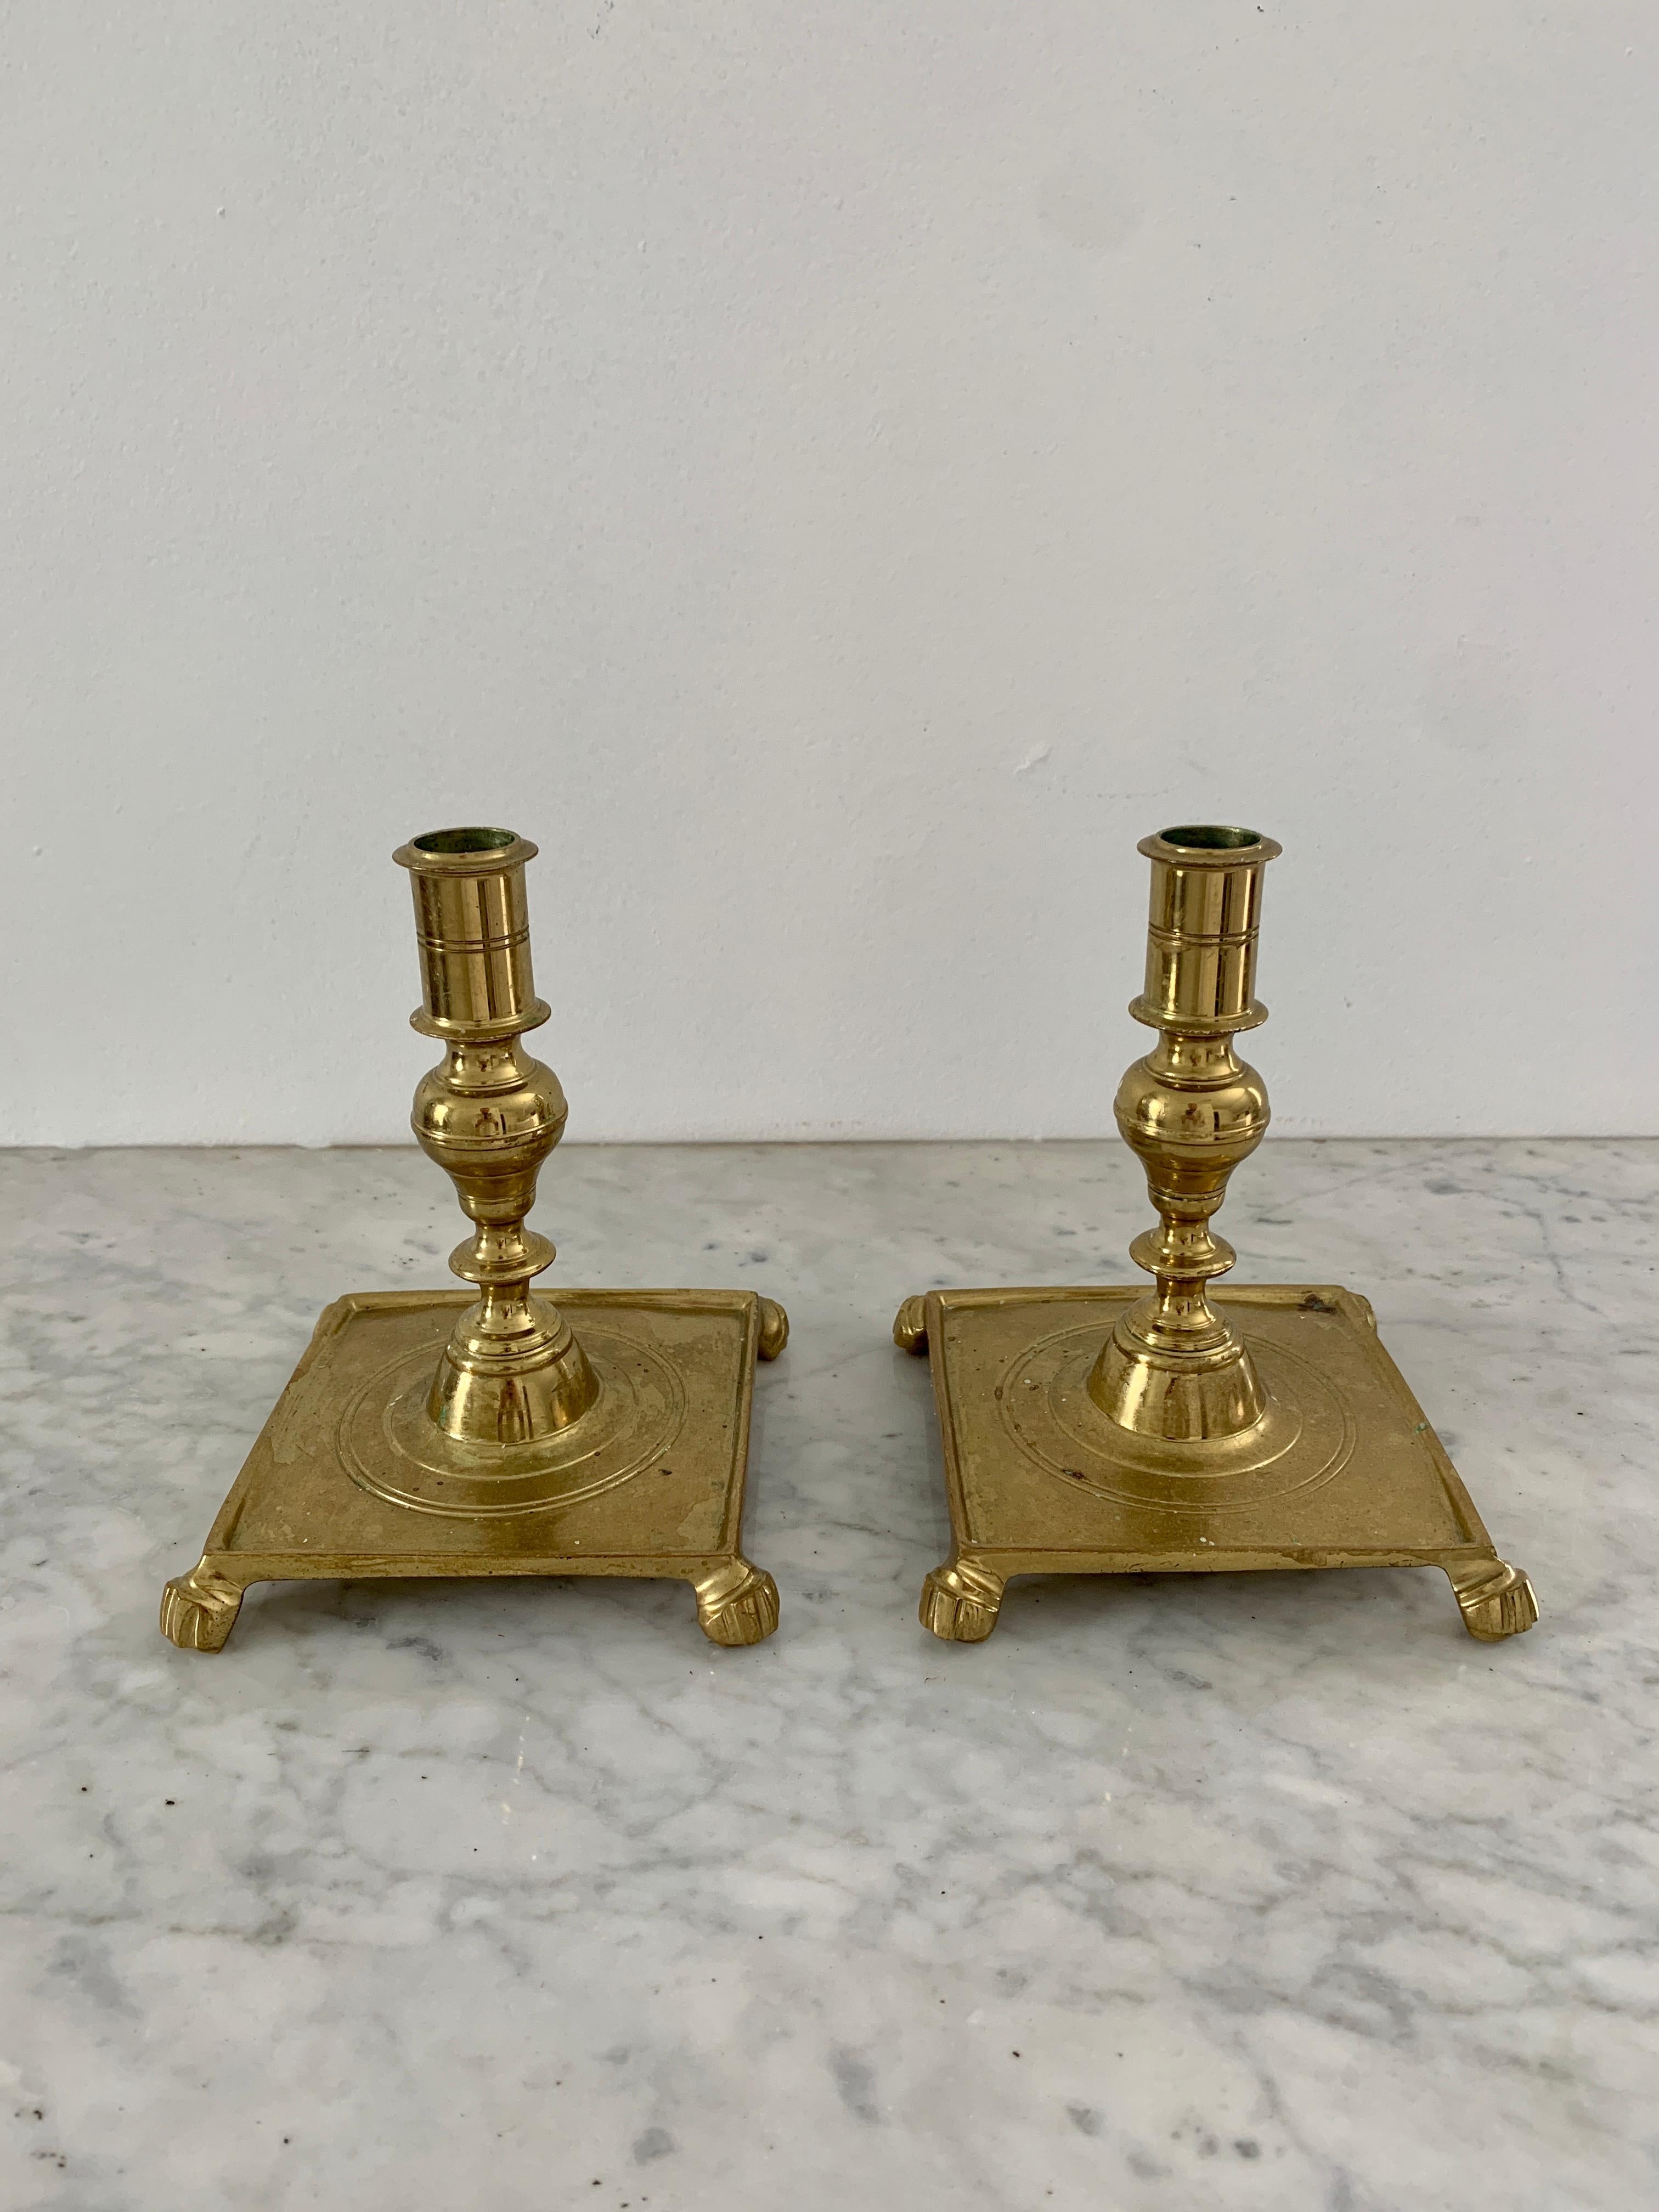 Pair of heavy vintage brass candlesticks on square bases with paw feet. Made by Colonial Williamsburg. This is a 20th century reproduction of a 17th century Spanish style. Measurements are for each.
  